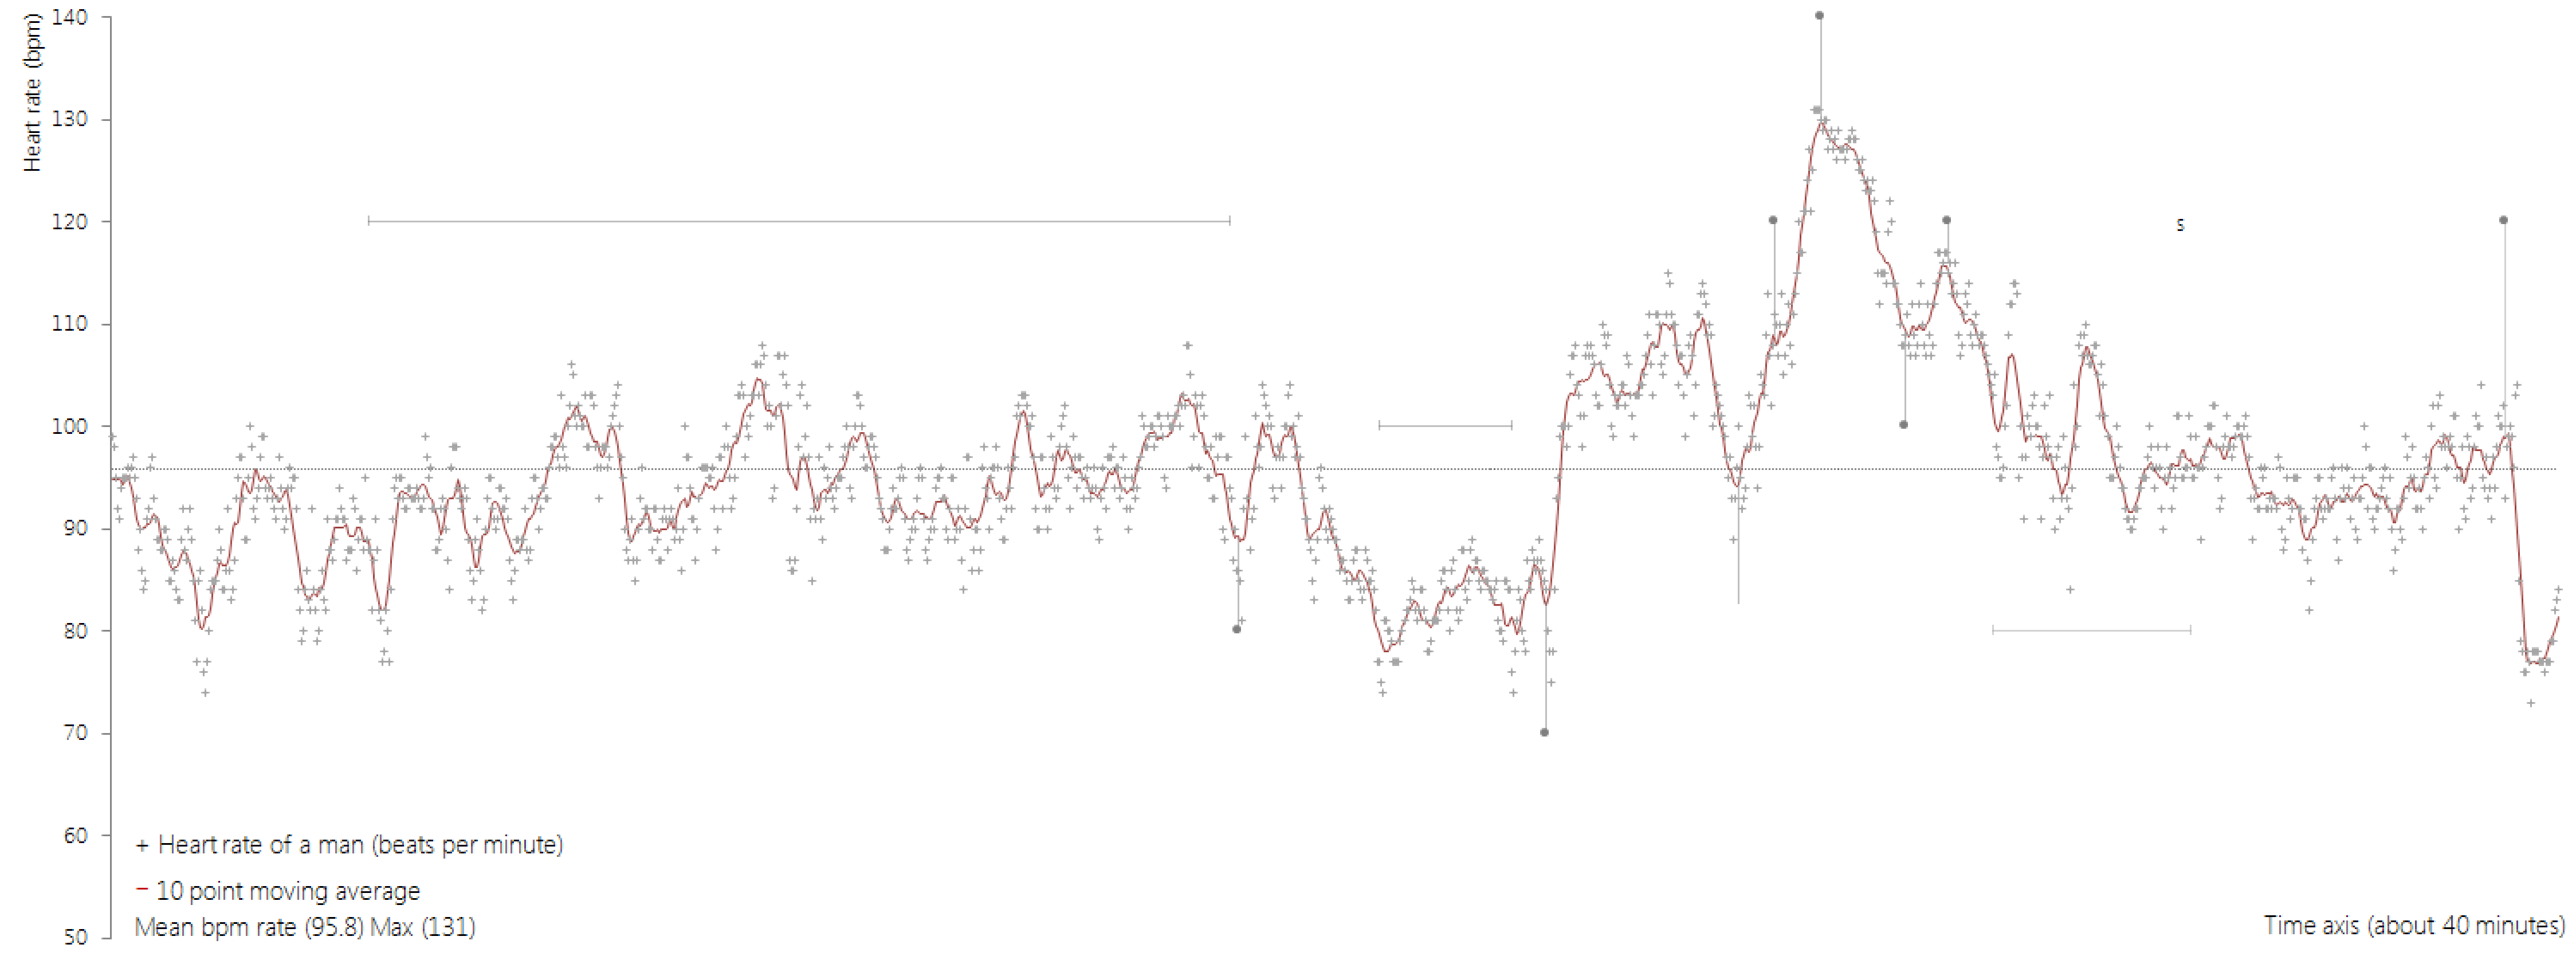 A line chart with dots representing measurements and fitted line between them. The title of the y axis is Heart rate (bmp) and the title of the x axis is Time axis (about 40 minutes)